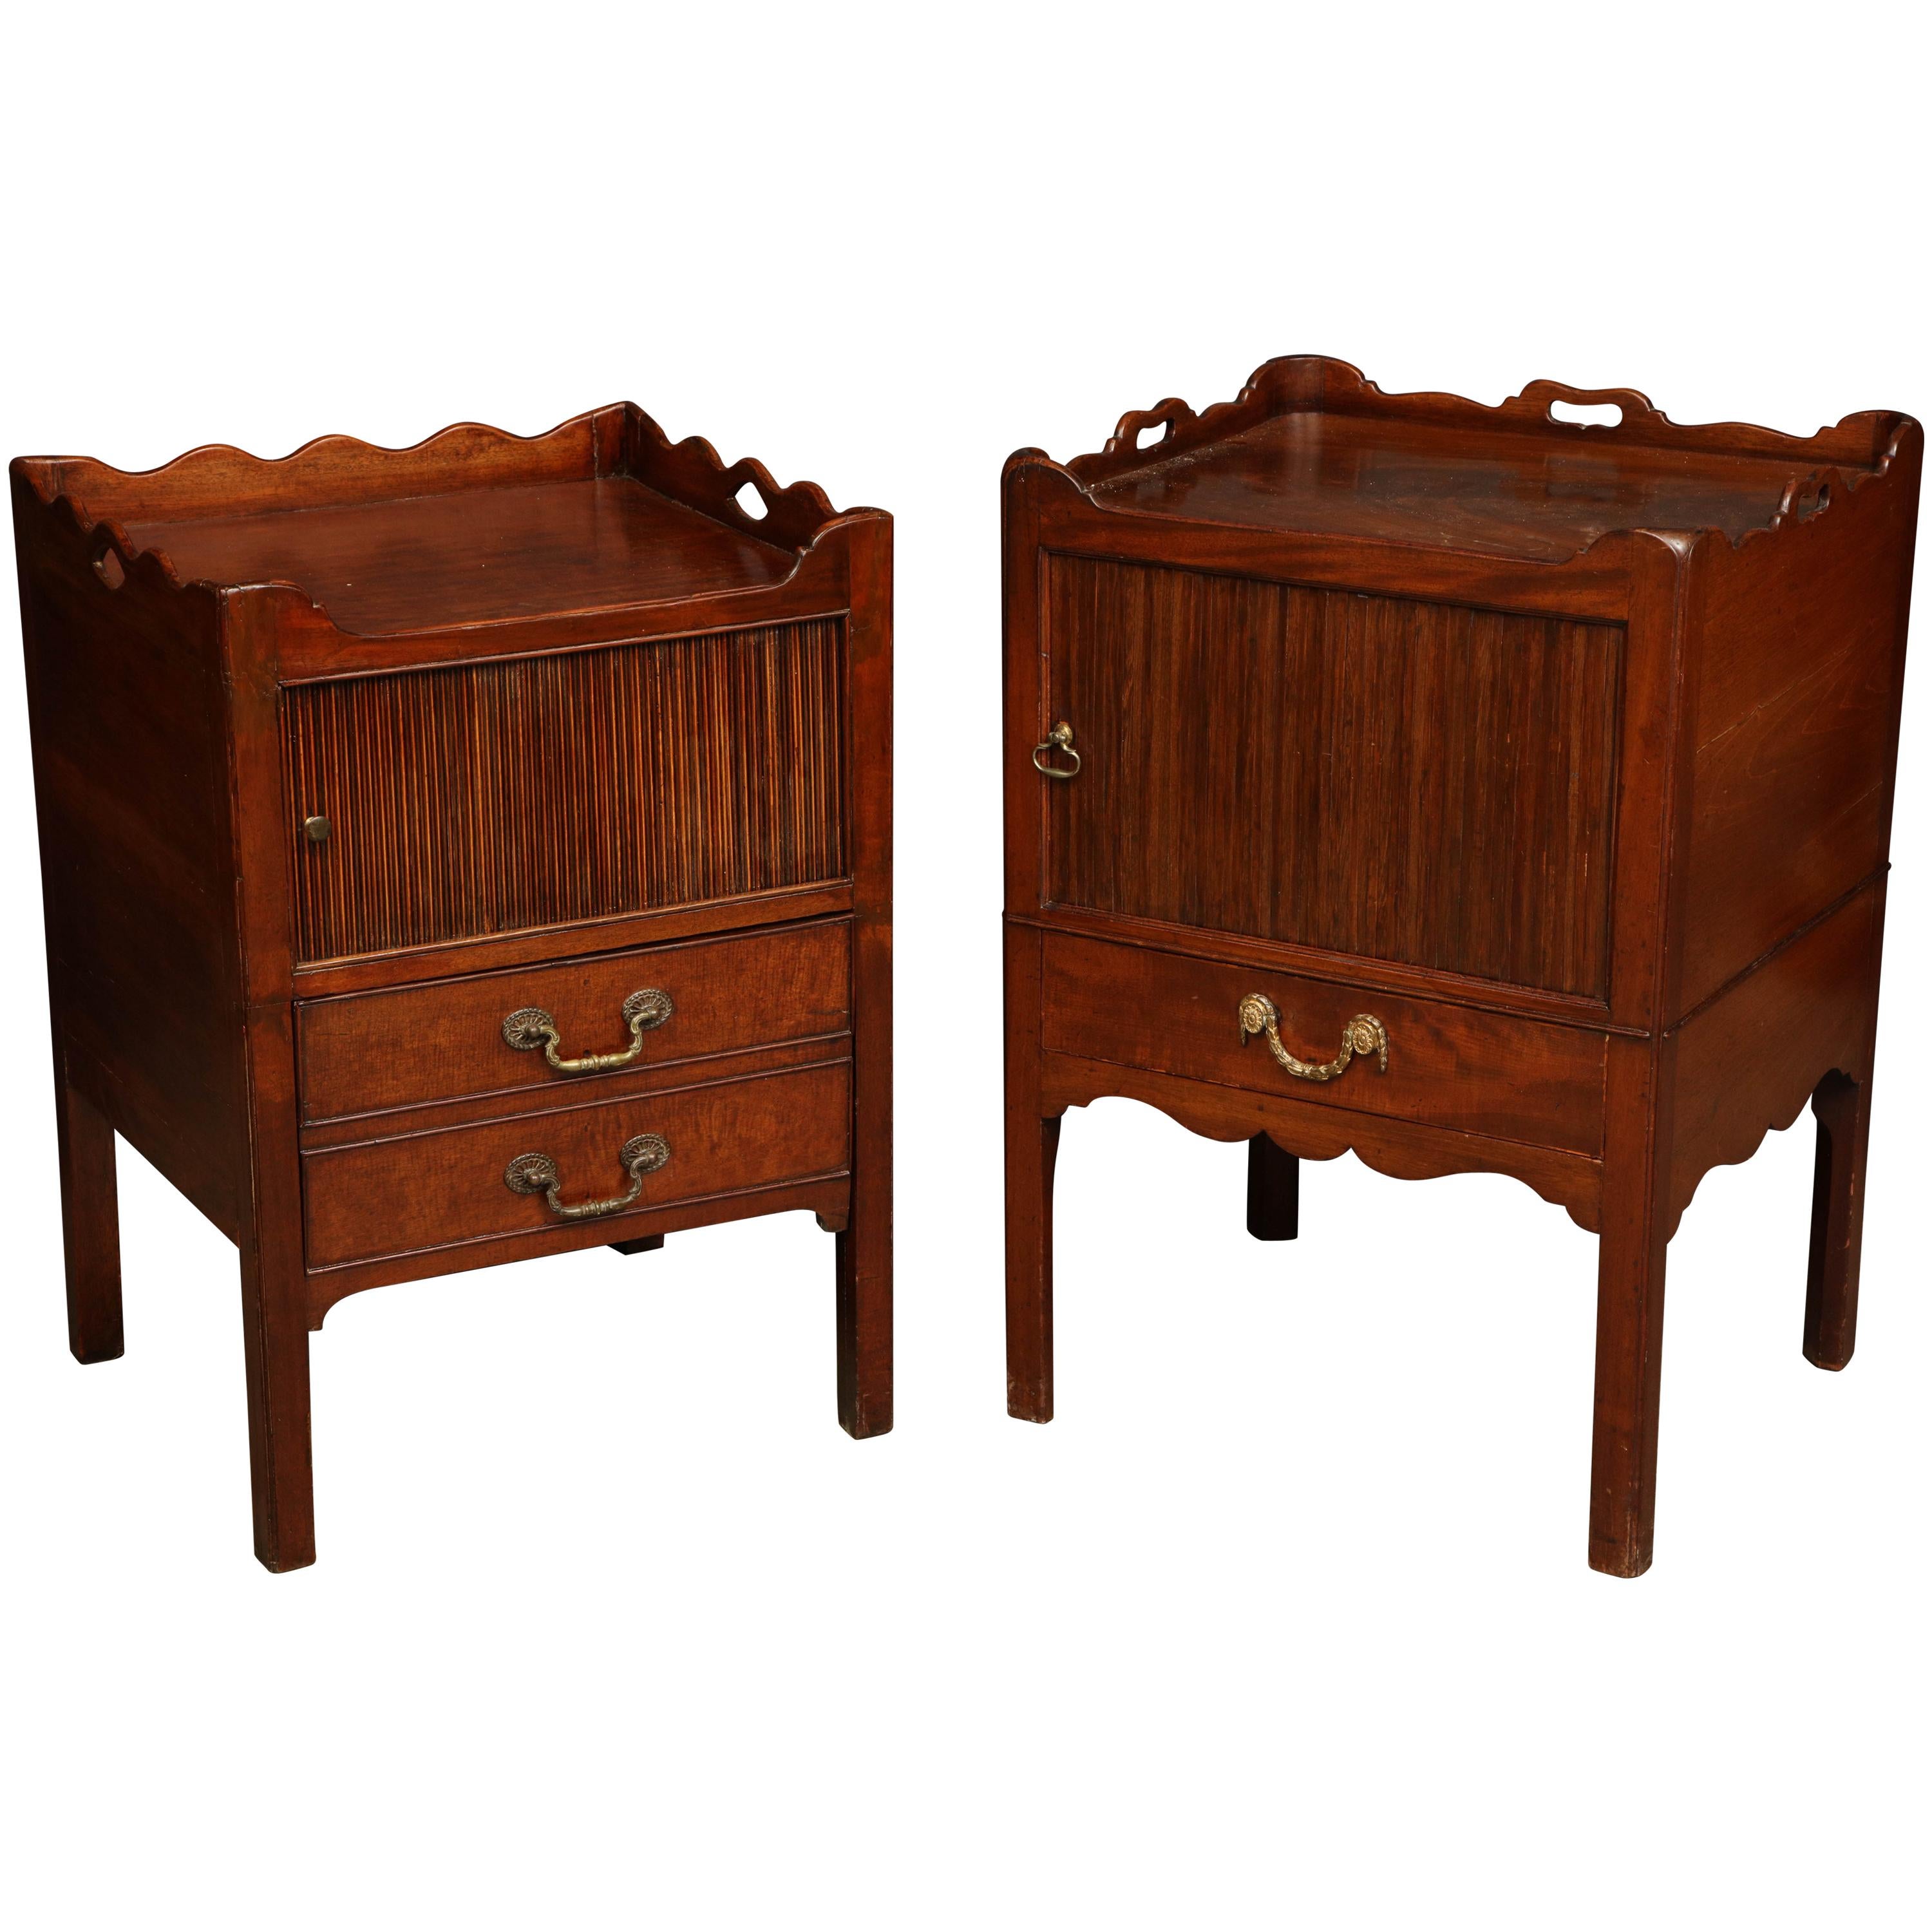 Near Pair of George III Bedside Commodes For Sale